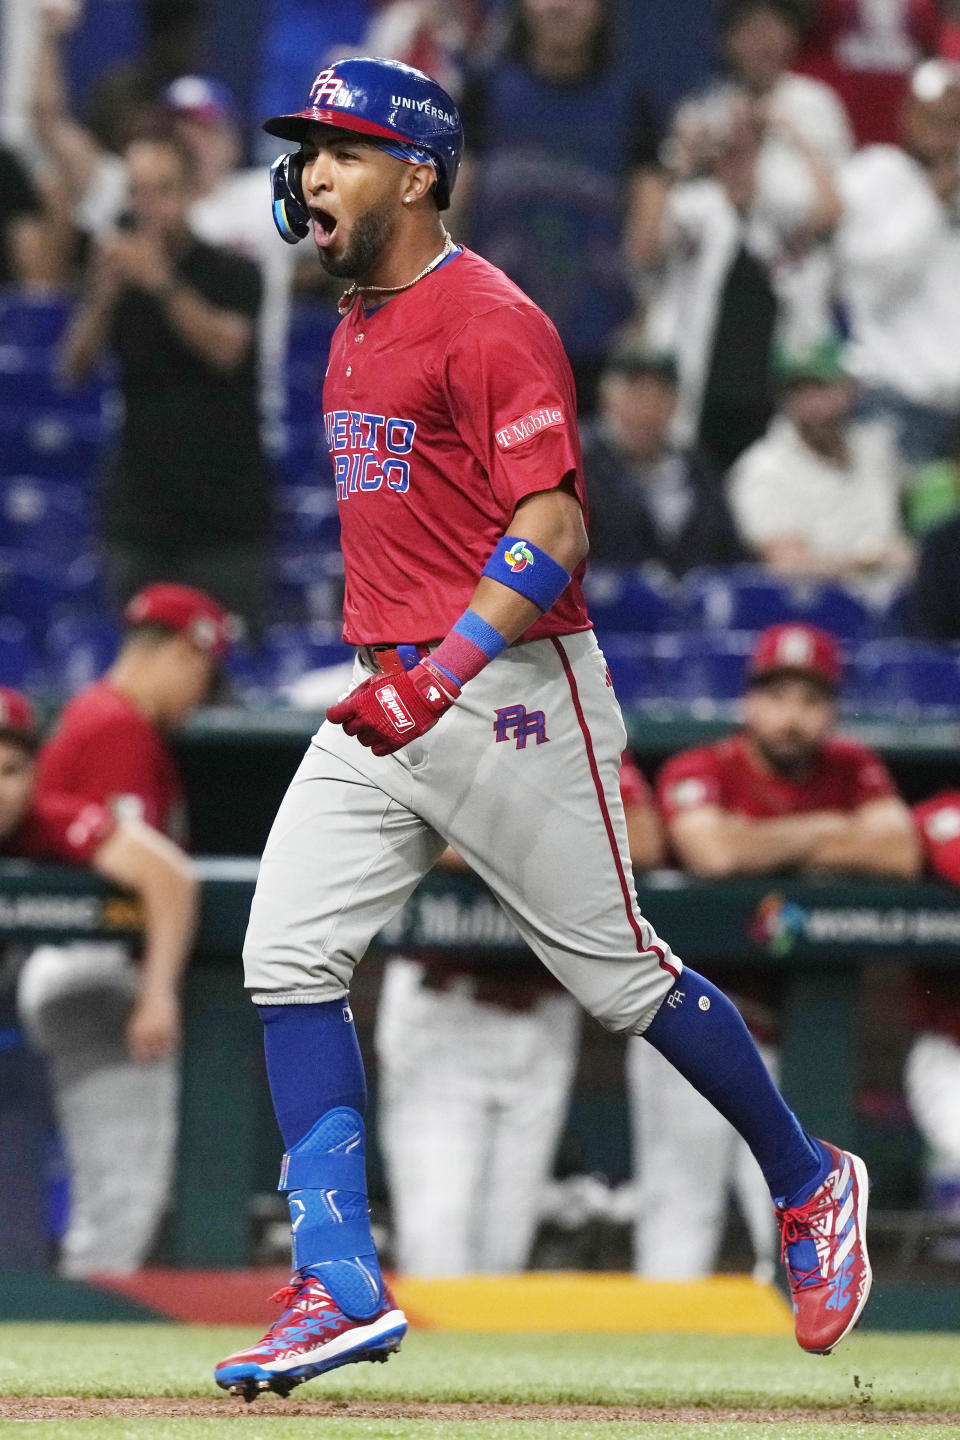 Puerto Rico's Eddie Rosario (17) yells after hitting a home run during the first inning of a World Baseball Classic game against Mexico, Friday, March 17, 2023, in Miami. (AP Photo/Marta Lavandier)